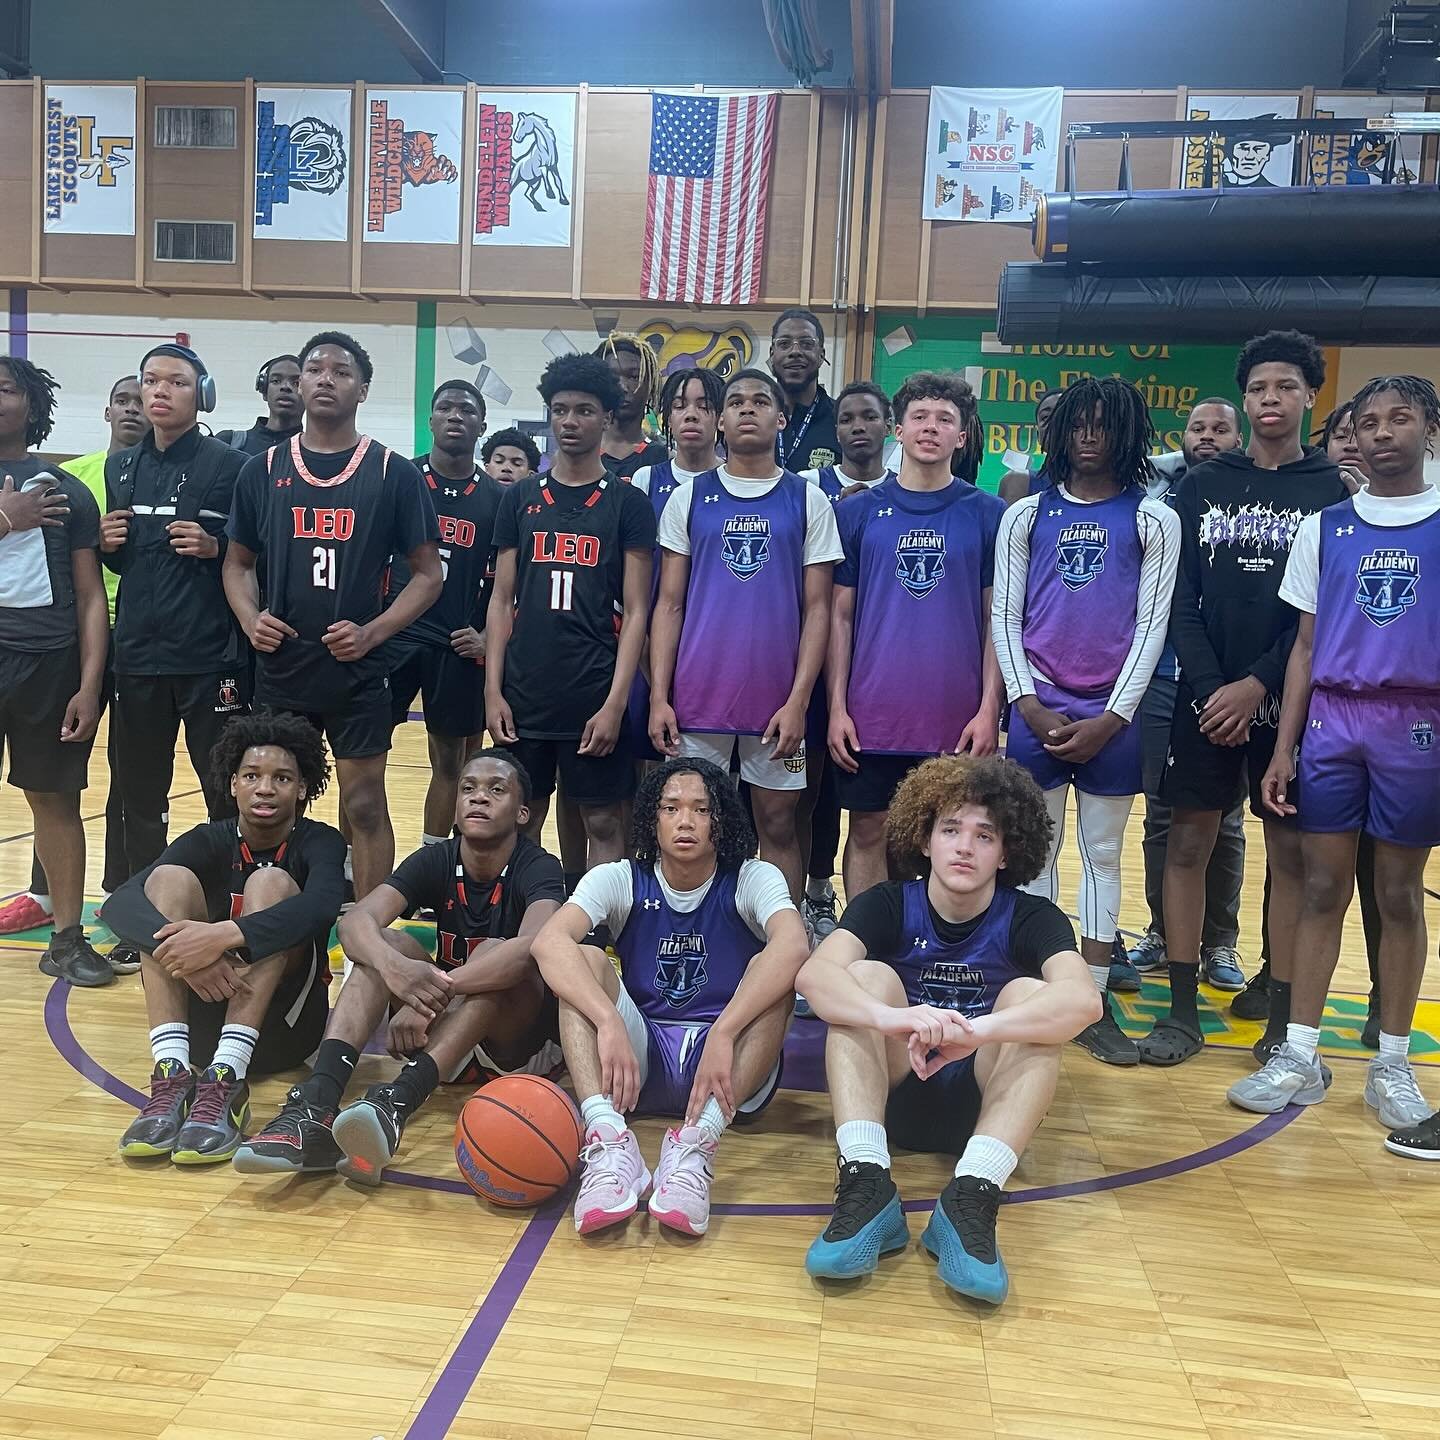 After our service-learning project, The Academy and @leohschicago played two games together at the Brookside Campus. After a day of working together, it was fun to compete against each other. The games were very competitive and these student-athletes